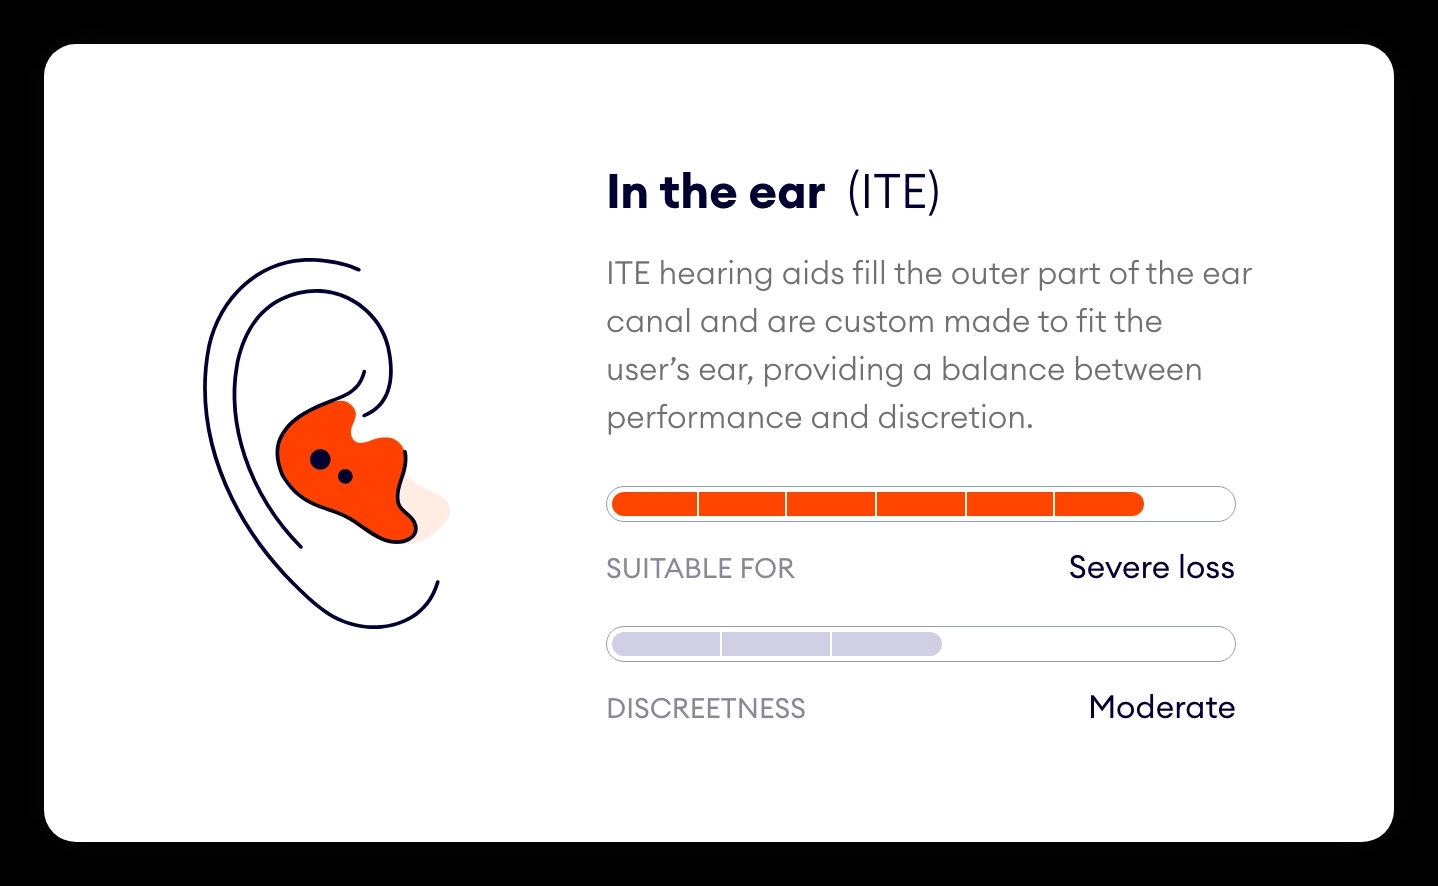 In the ear (ITE) hearing aid graphic